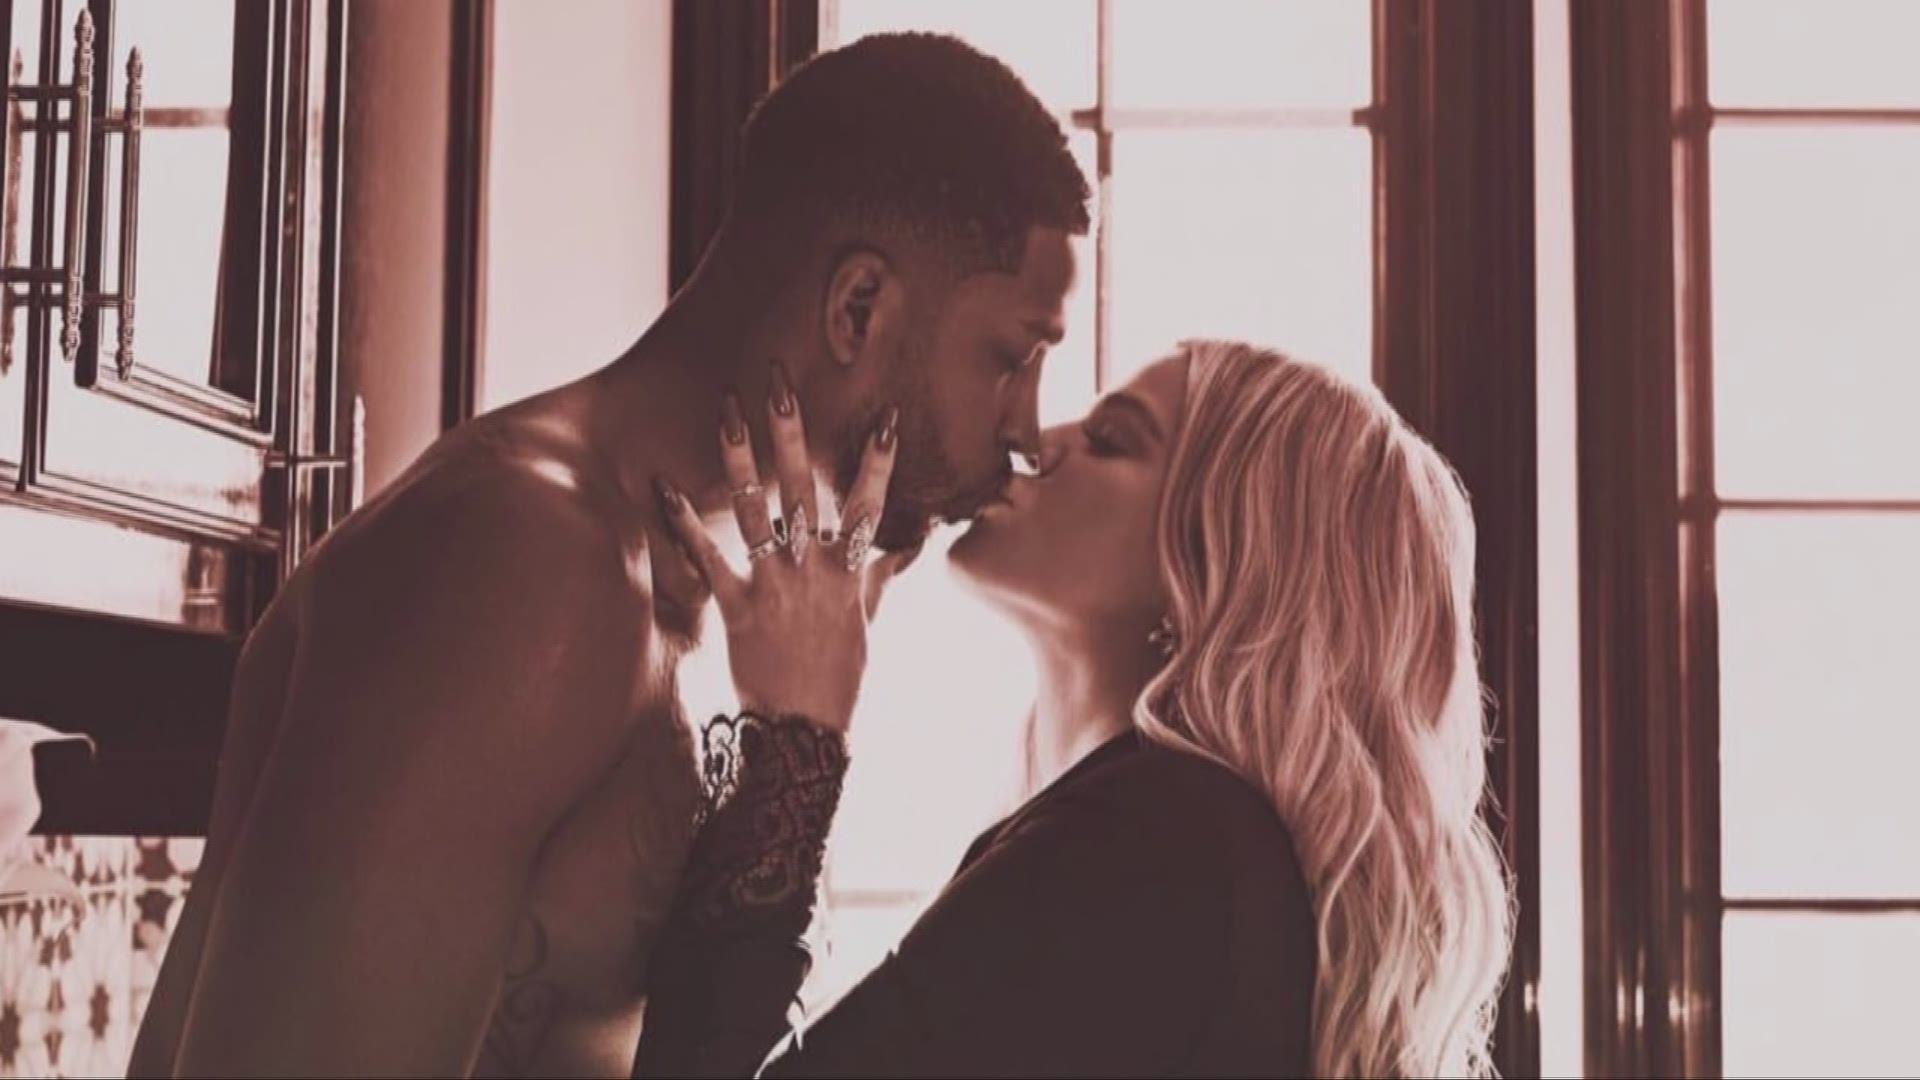 Khloe Kardashian gives birth to baby girl; Tristan Thompson at Cleveland hospital for birth